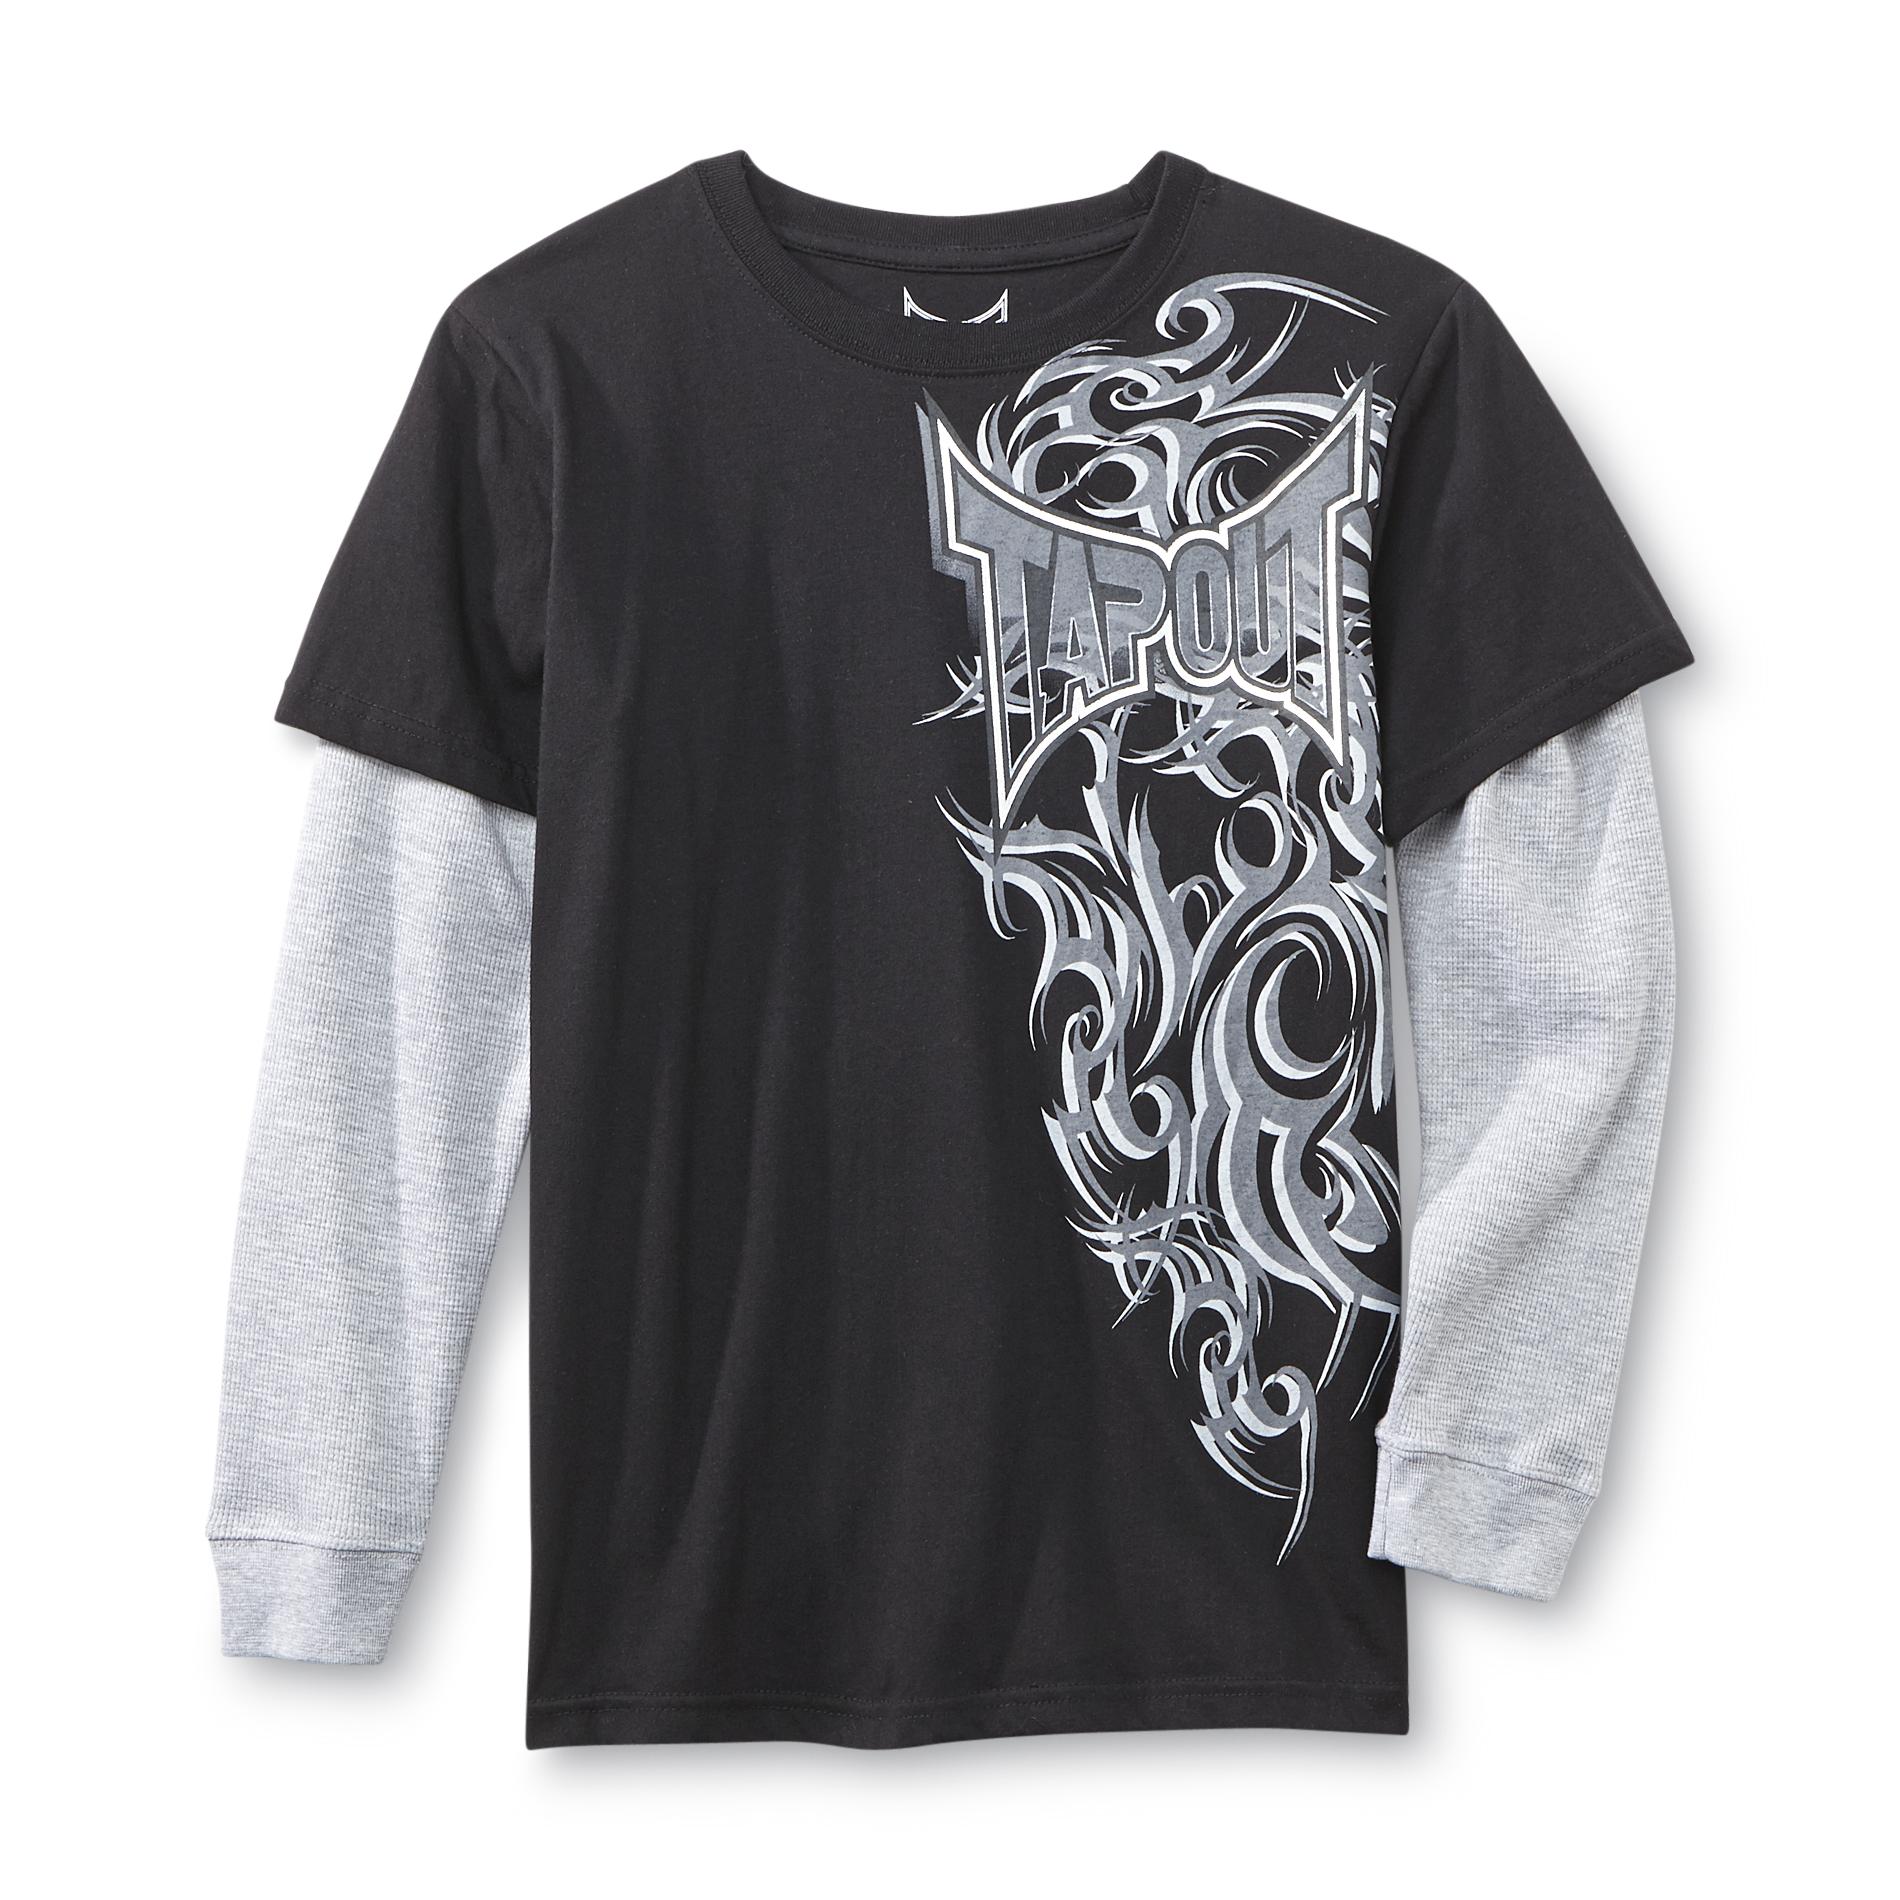 TapouT Boy's Long-Sleeve Graphic T-Shirt - Cross